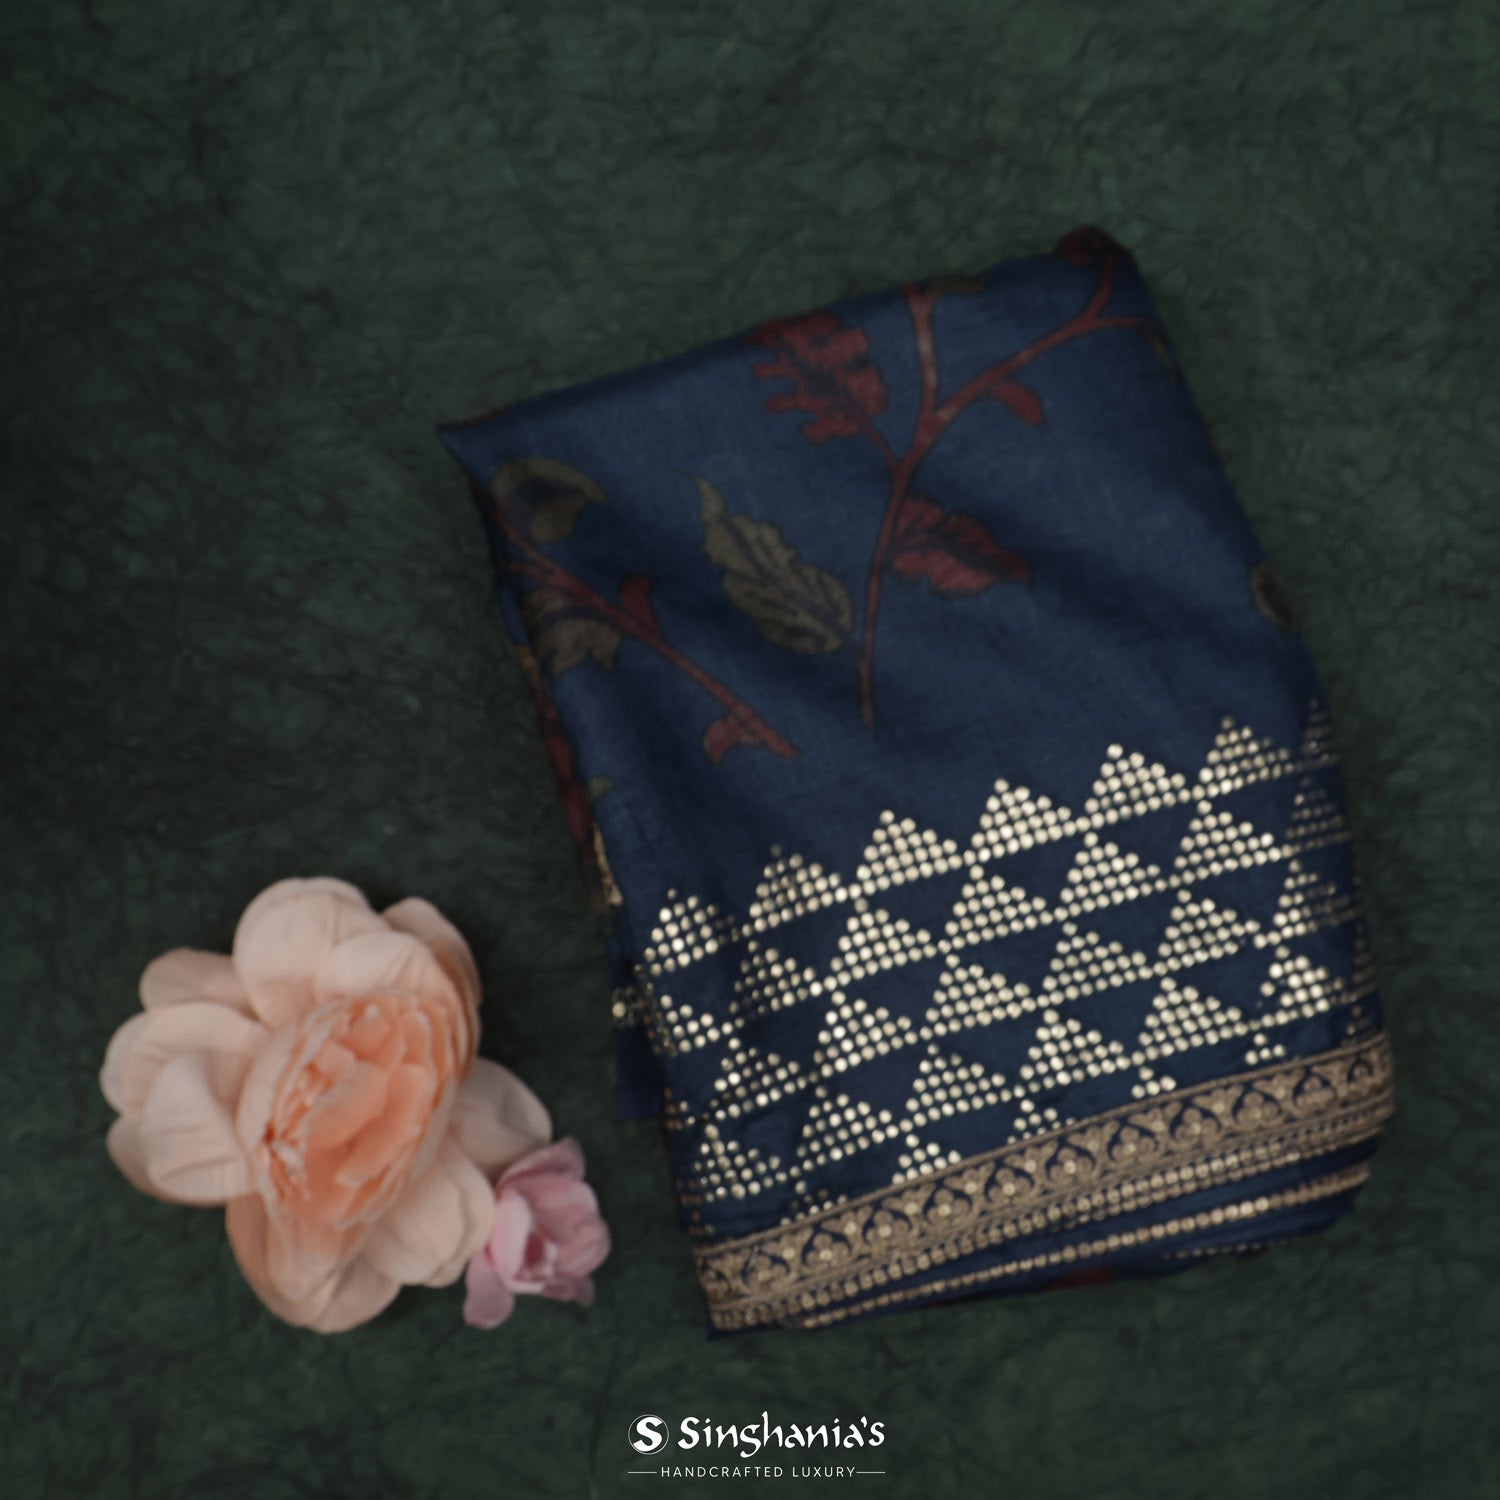 Navy Blue Tussar Saree With Printed Floral Strips